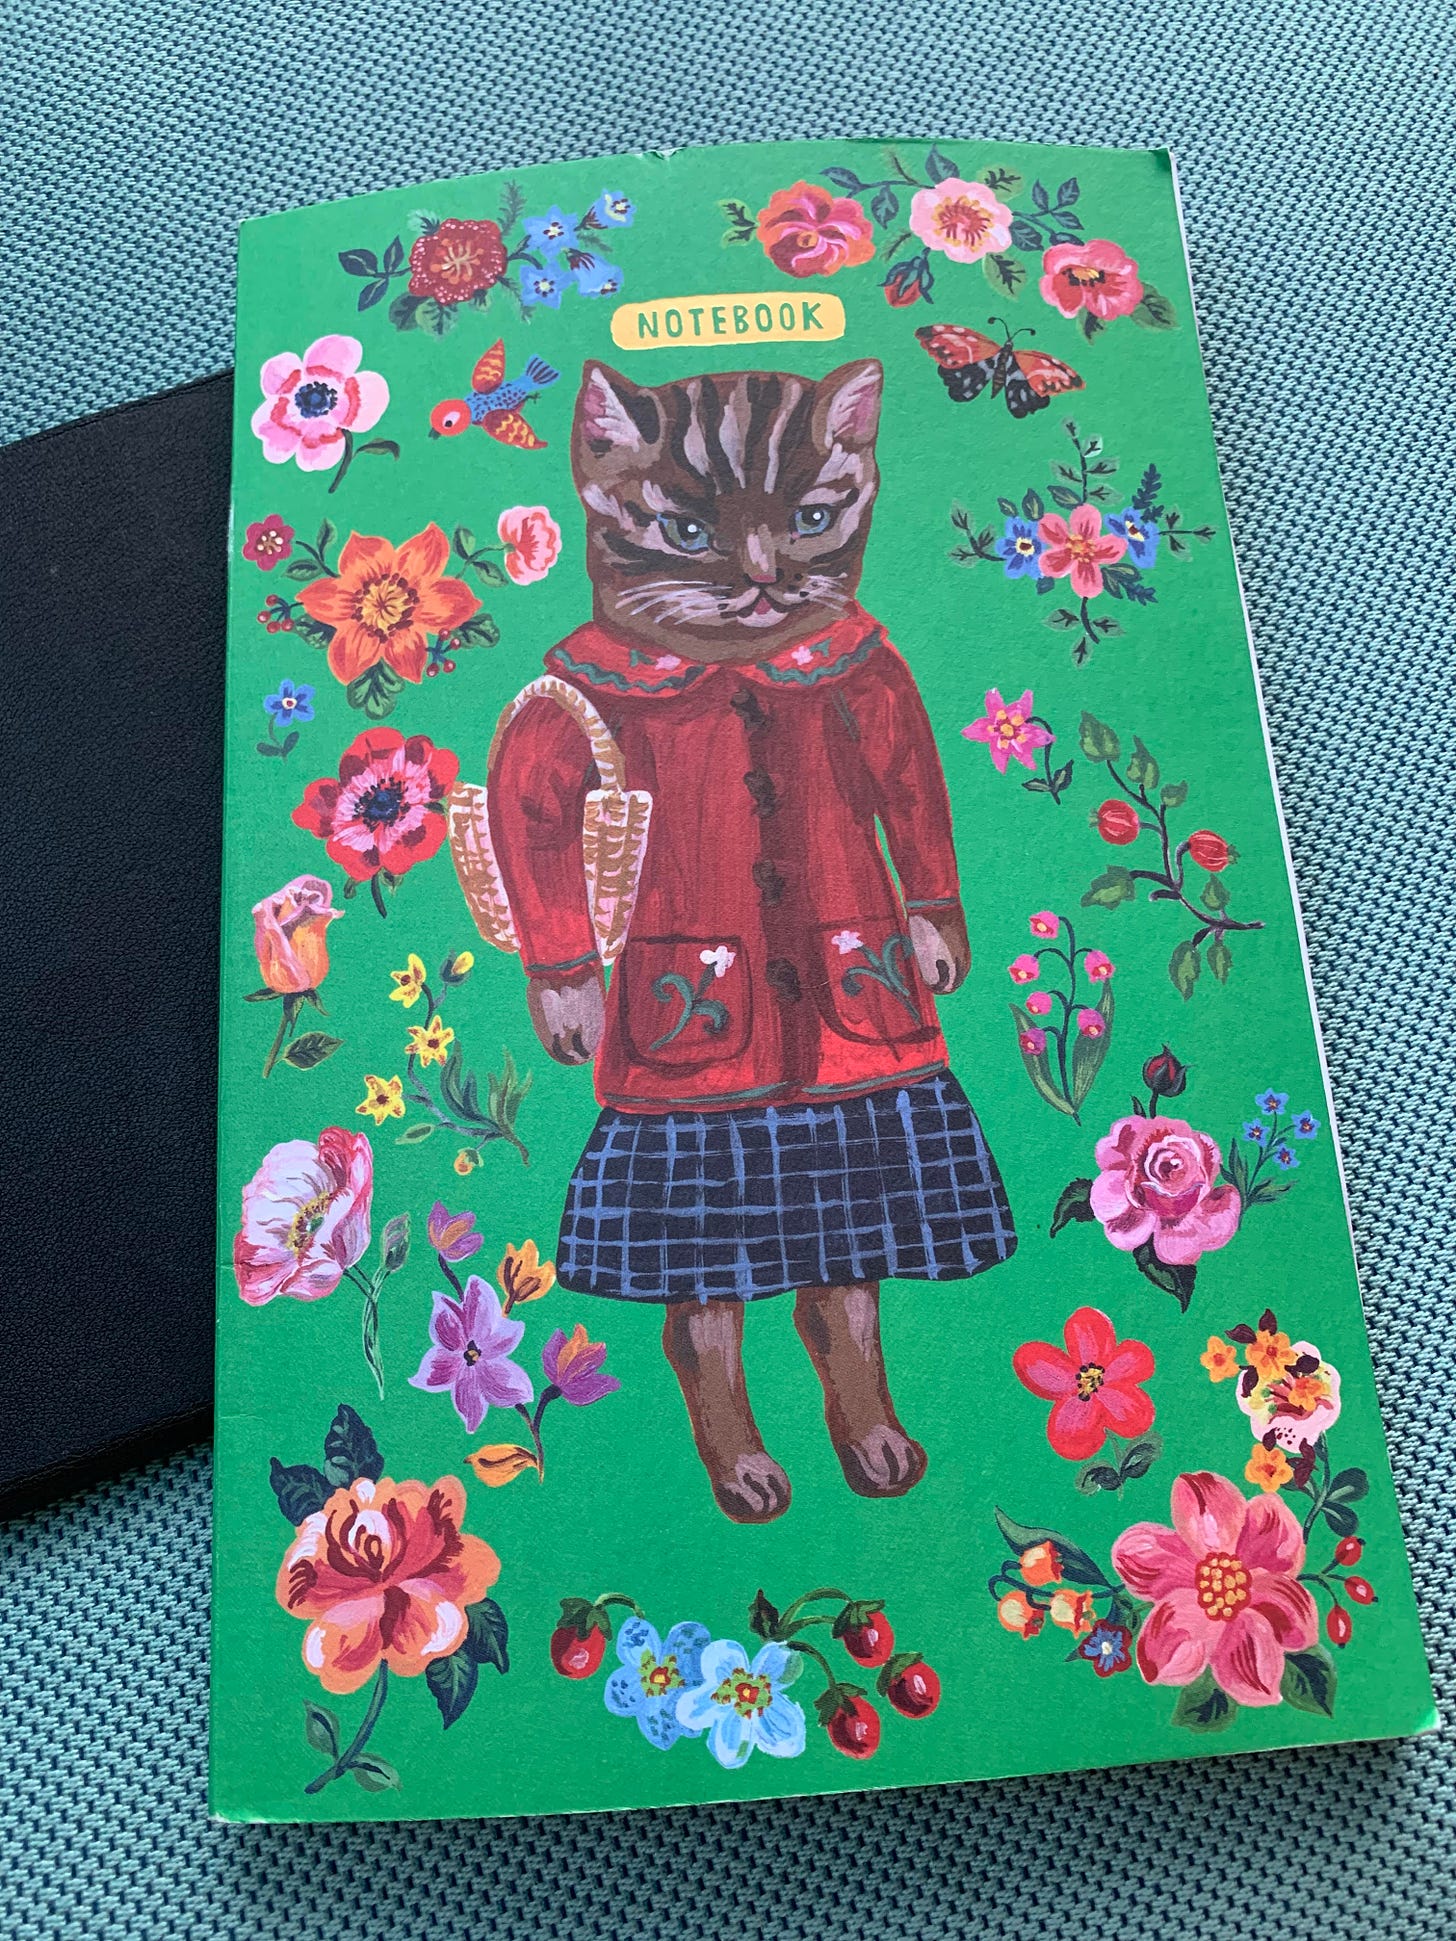 A green journal cover with an image of a brown cat wearing a red sweater and blue skirt and holding a basket, surrounded by flowers on a vibrant green background